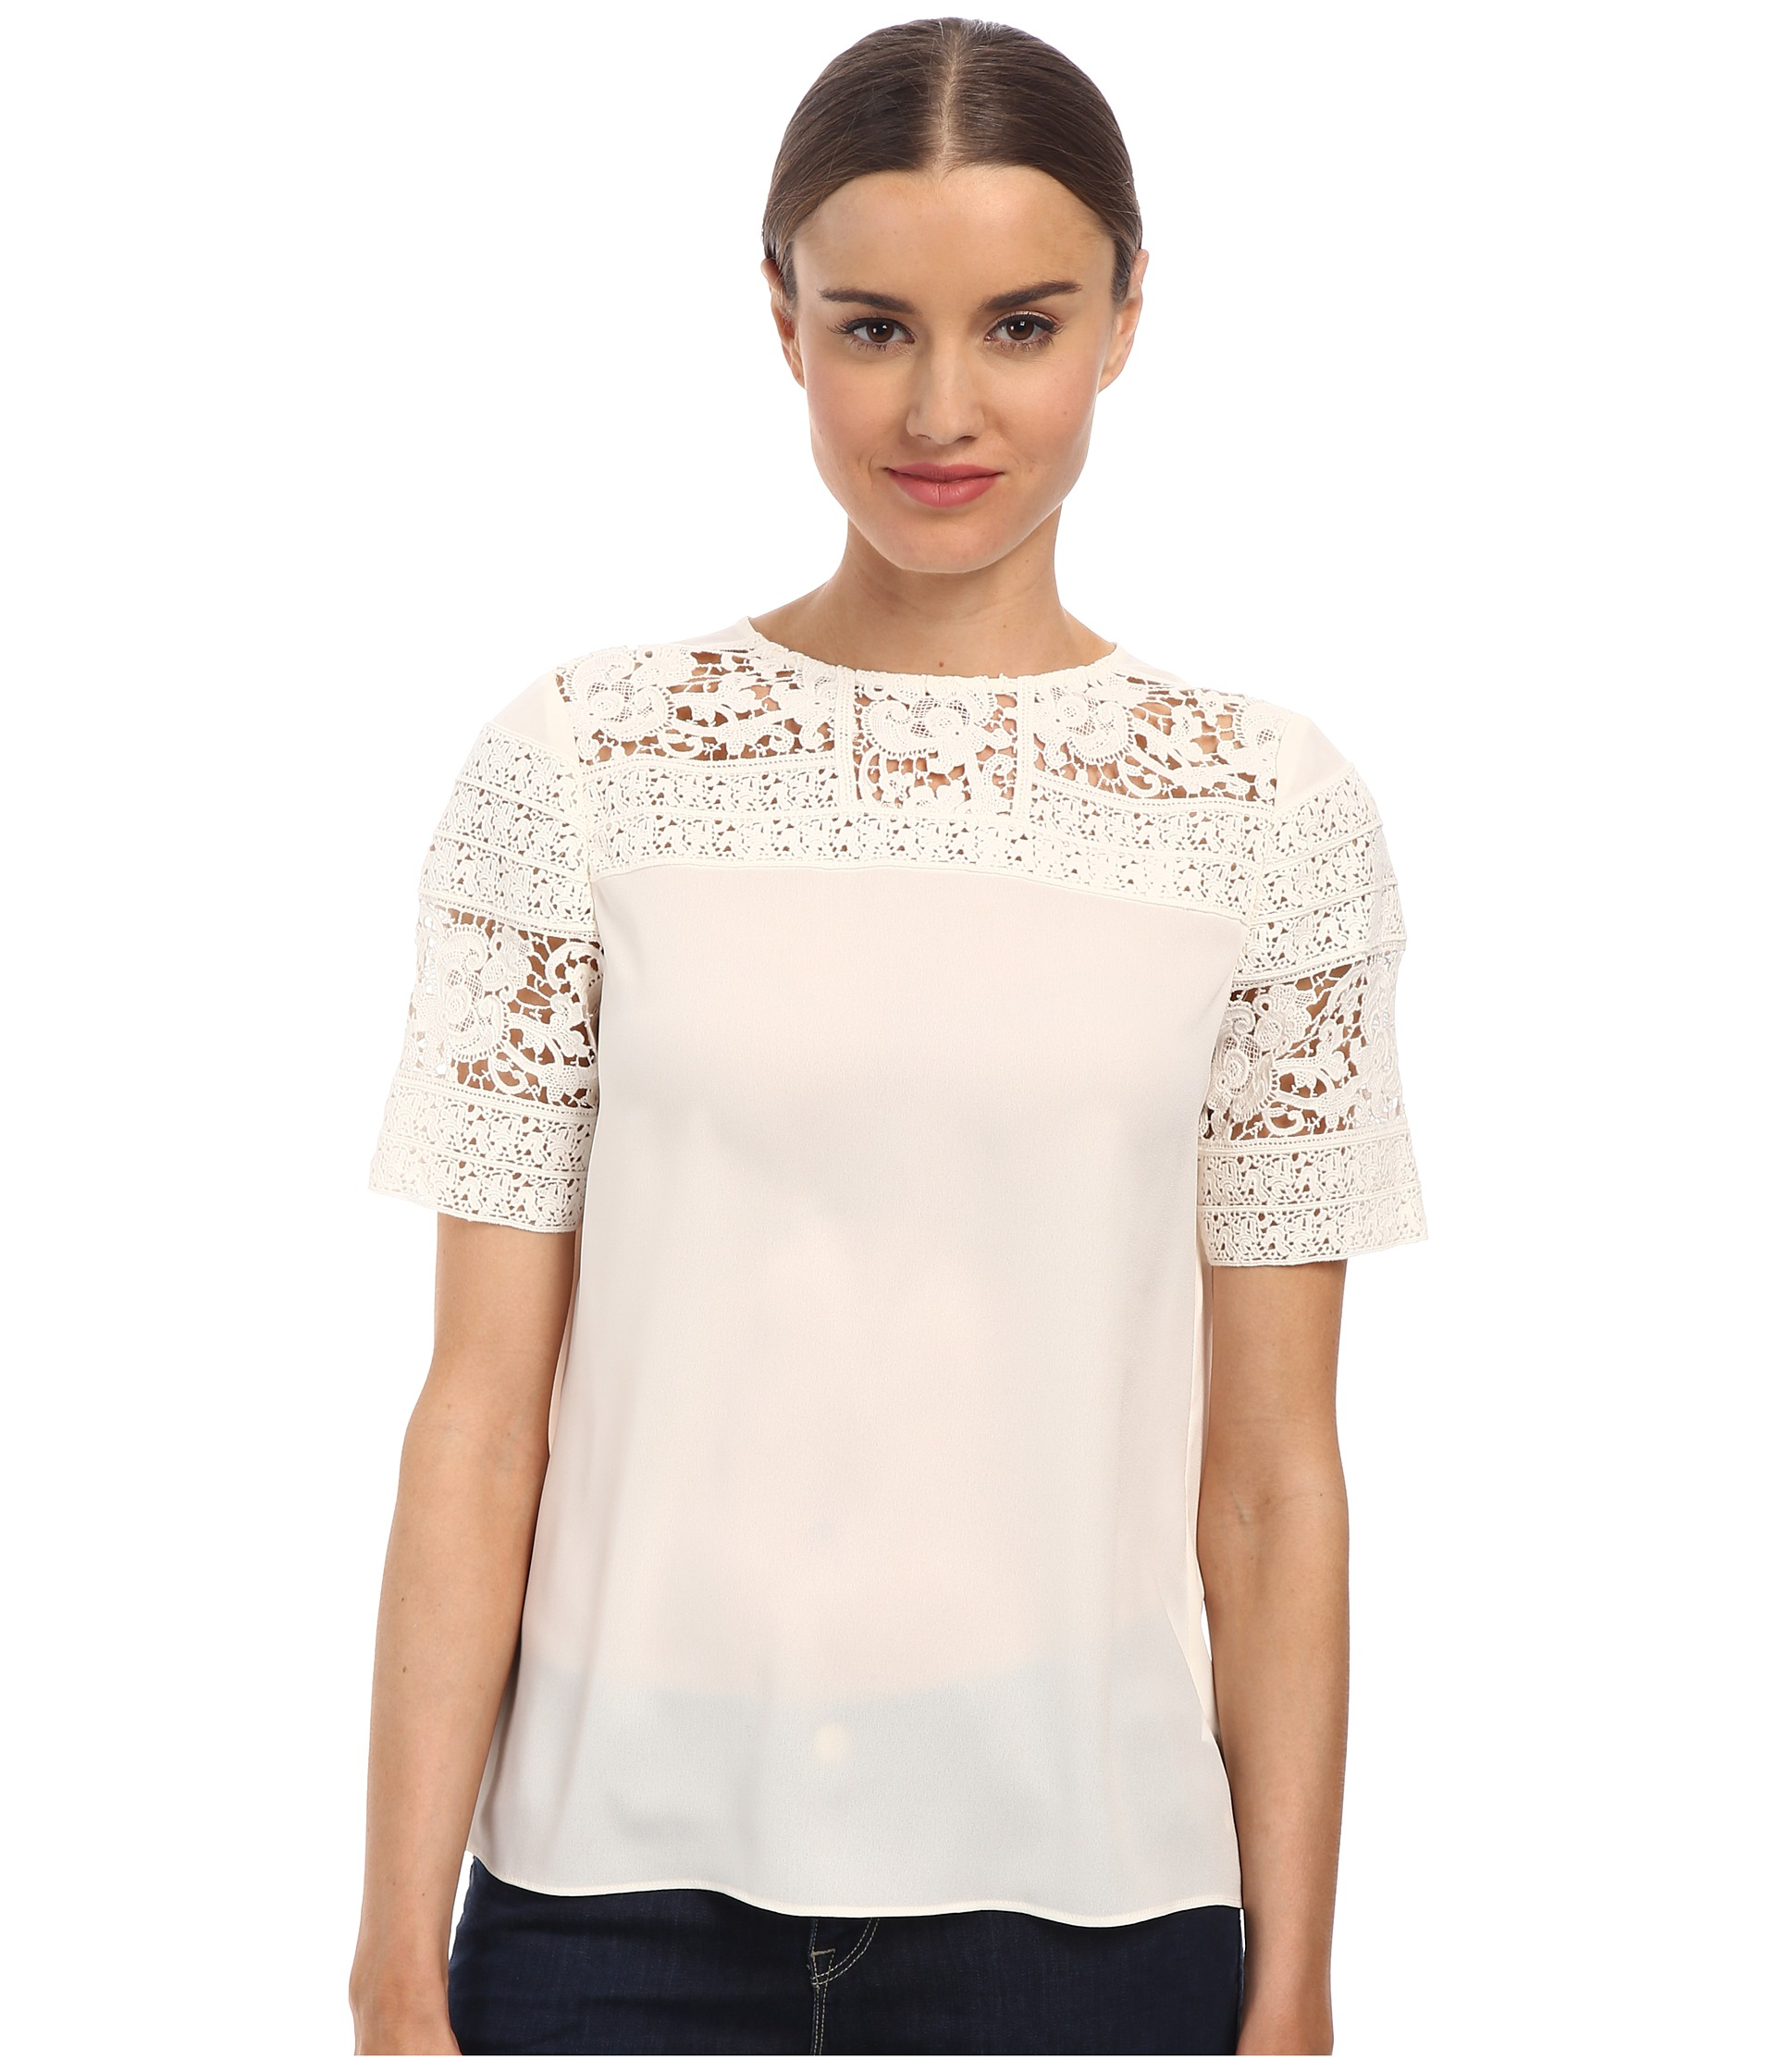 Lyst - Armani jeans Lace Illusion Blouse in White